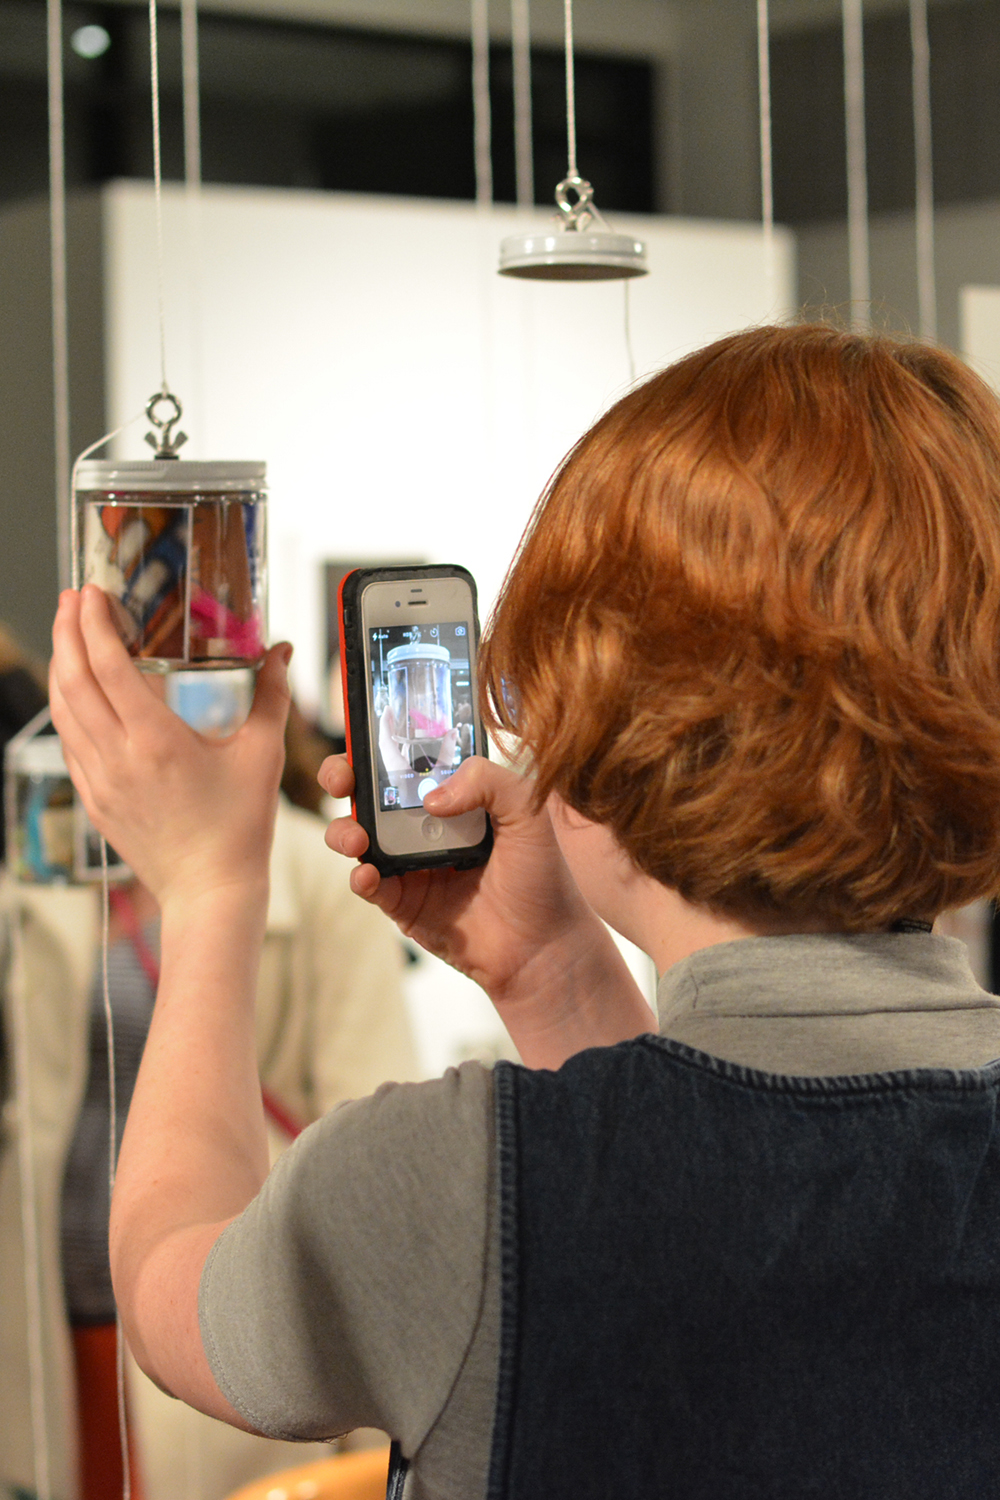 A visitors taking a photograph of the jar she made, after putting it on display.